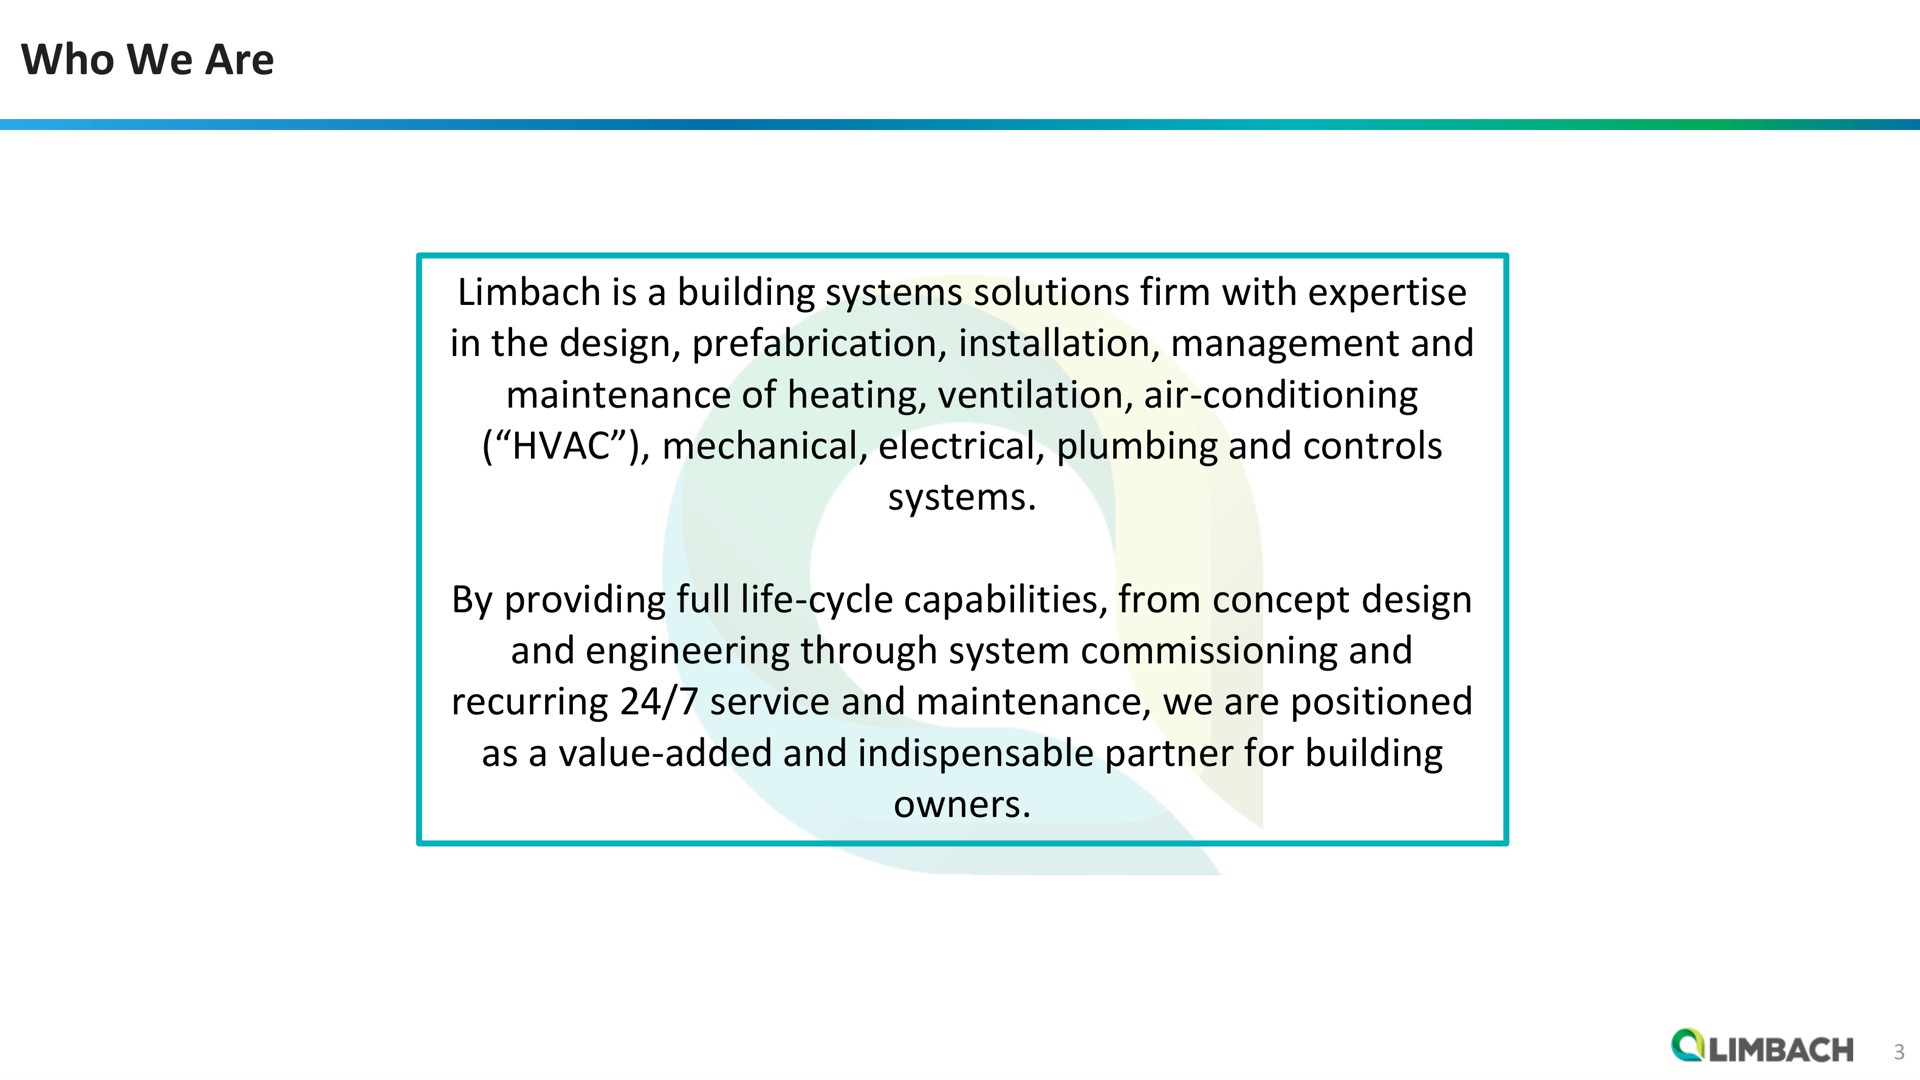 who we are is a building systems solutions firm with in the design prefabrication installation management and maintenance of heating ventilation air conditioning mechanical electrical plumbing and controls systems by providing full life cycle capabilities from concept design and engineering through system commissioning and recurring service and maintenance we are positioned as a value added and indispensable partner for building owners | Limbach Holdings